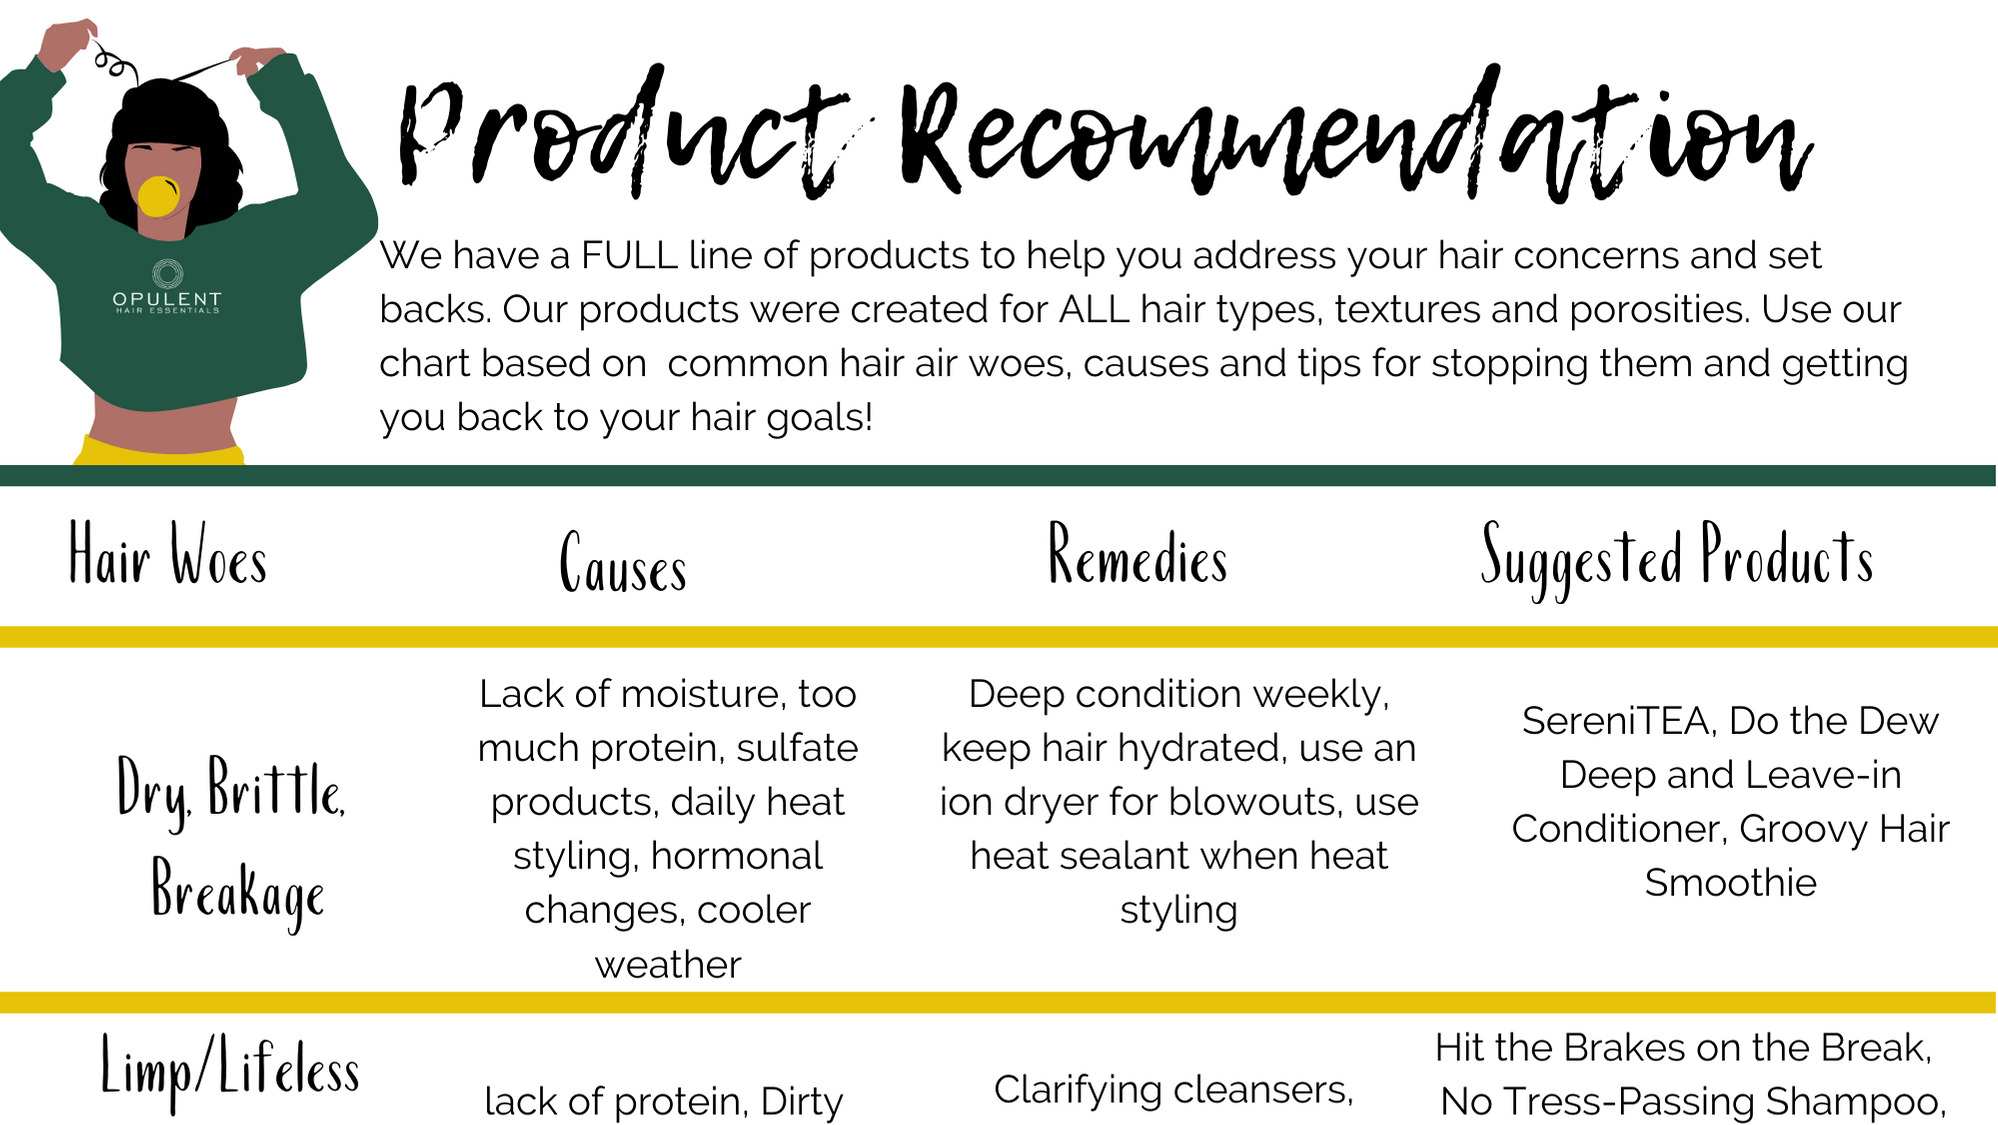 We have a FULL line of products to help you address your hair concerns and set backs. Our products were created for ALL hair types, textures and porosities. Use our chart based on  common hair air woes, causes and tips for stopping them and getting you back to your hair goals!